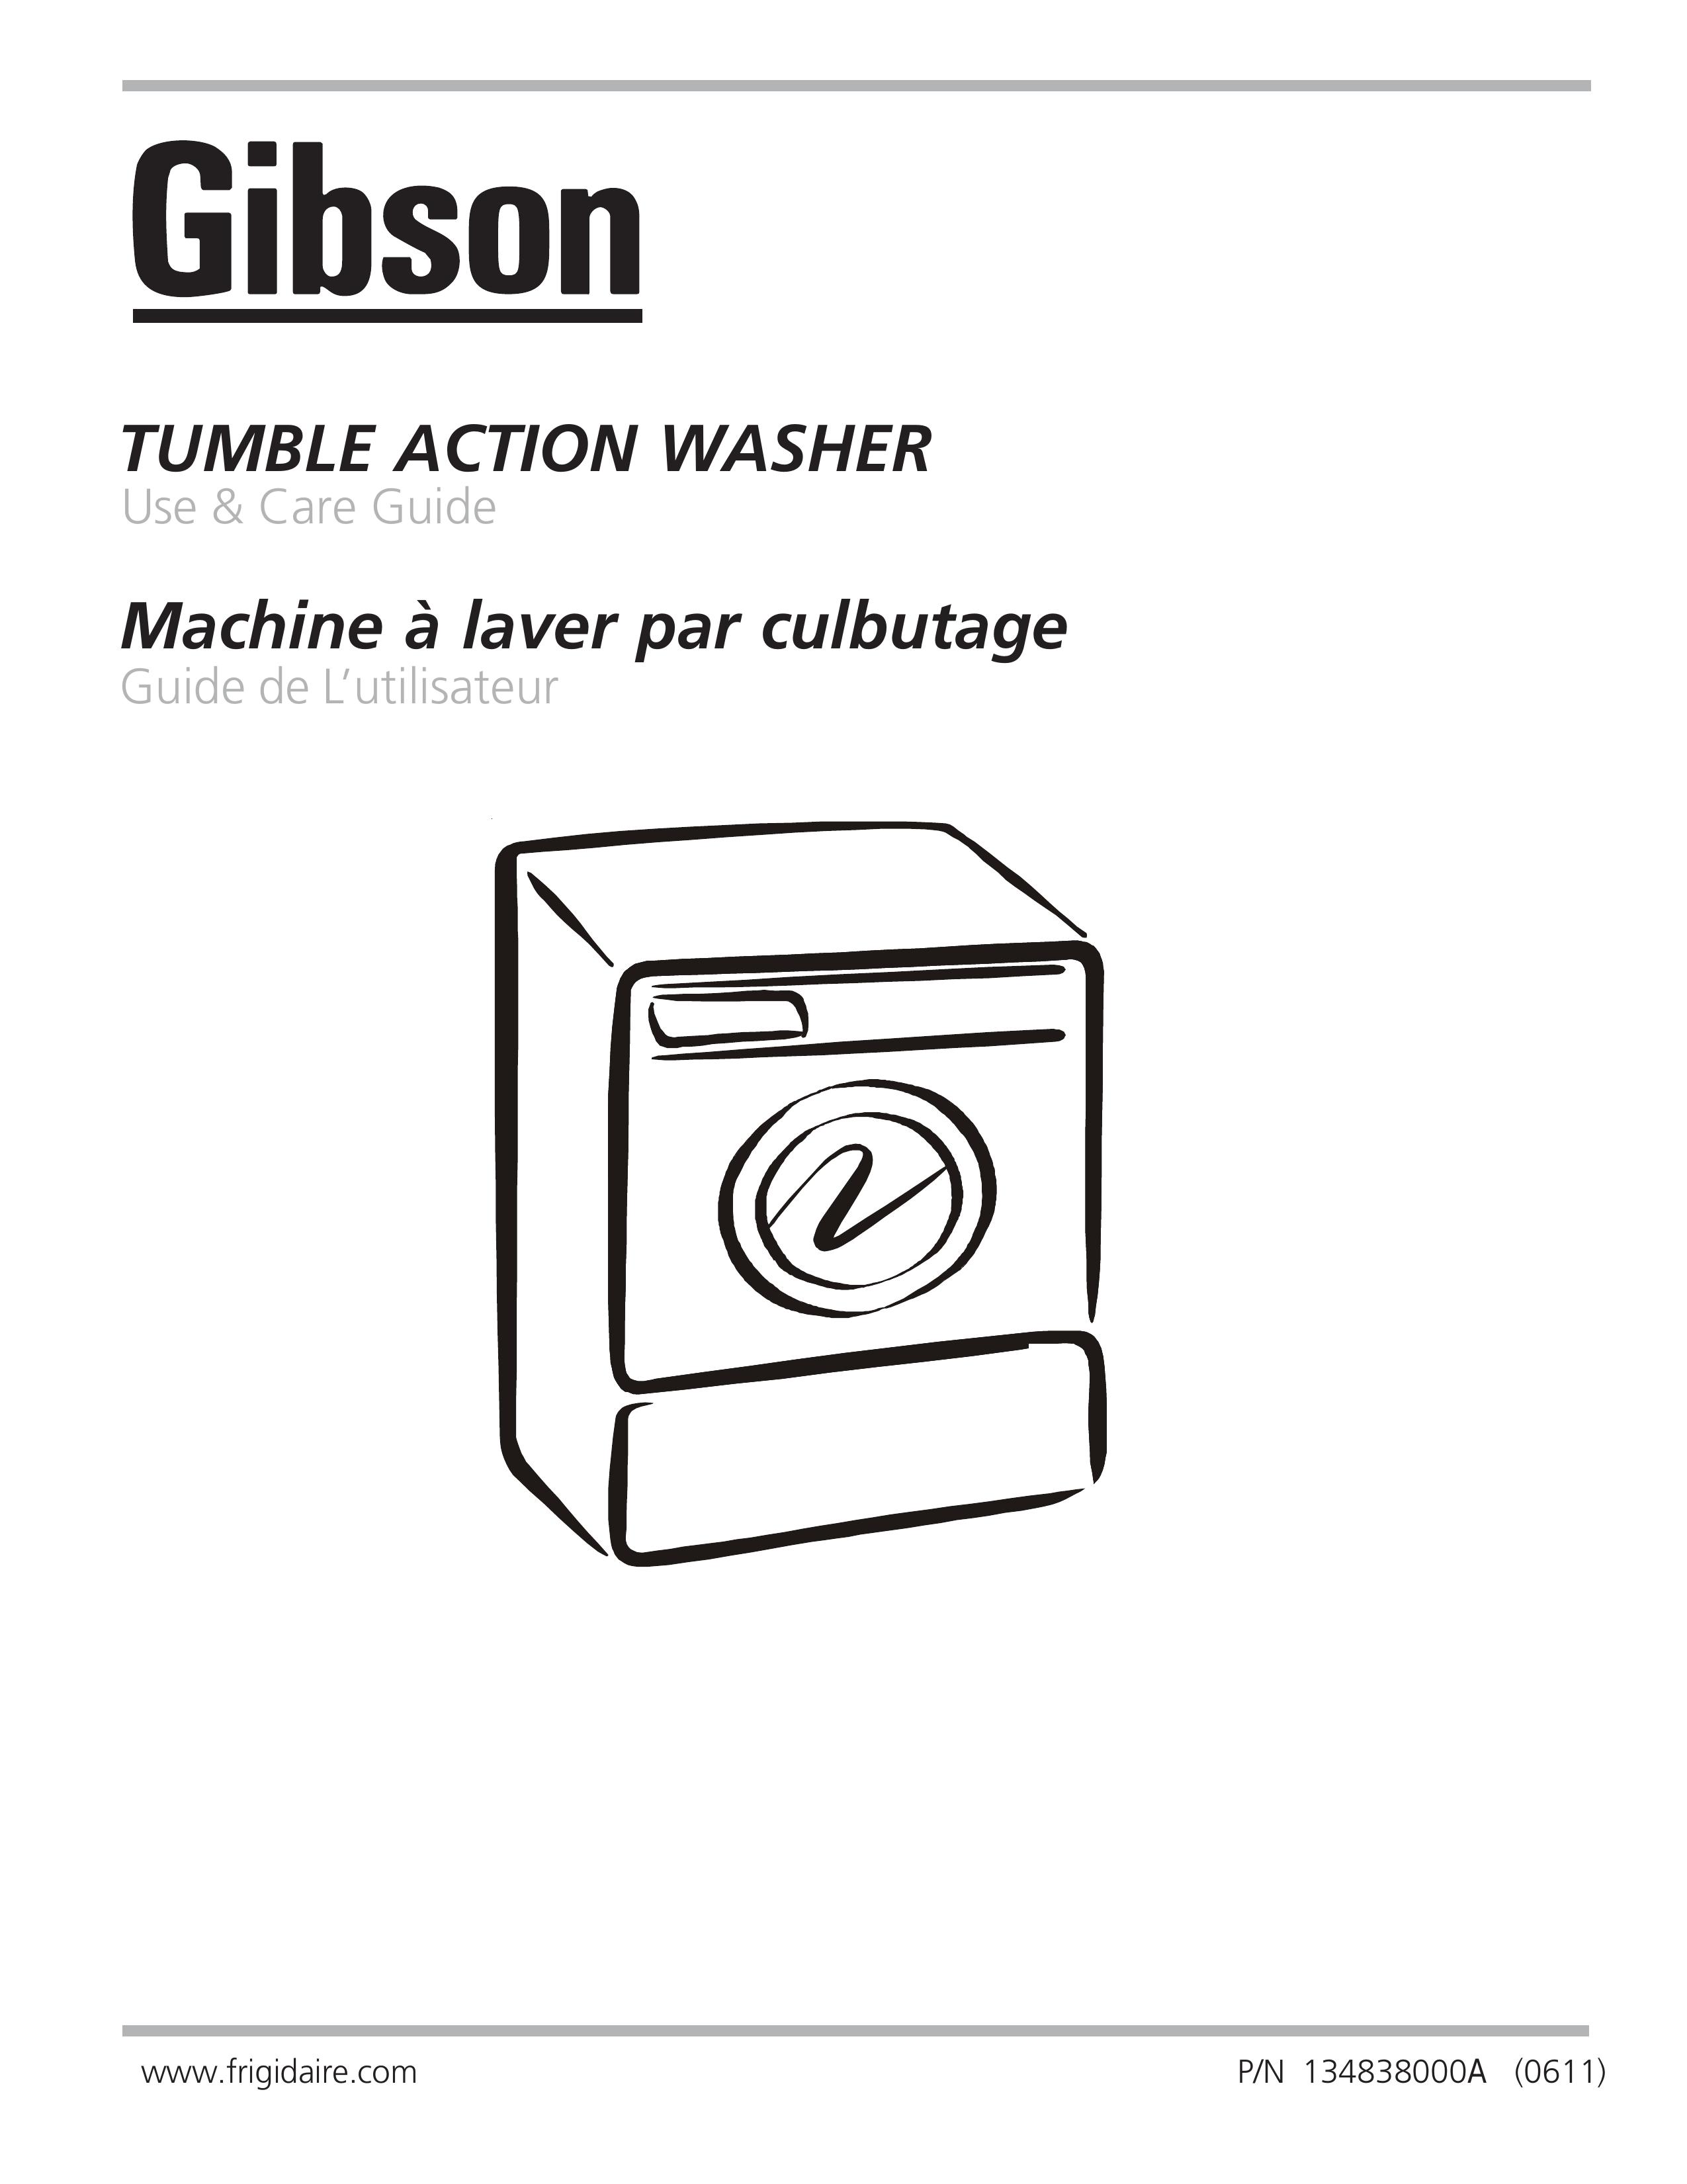 Electrolux - Gibson 134838000A Washer User Manual